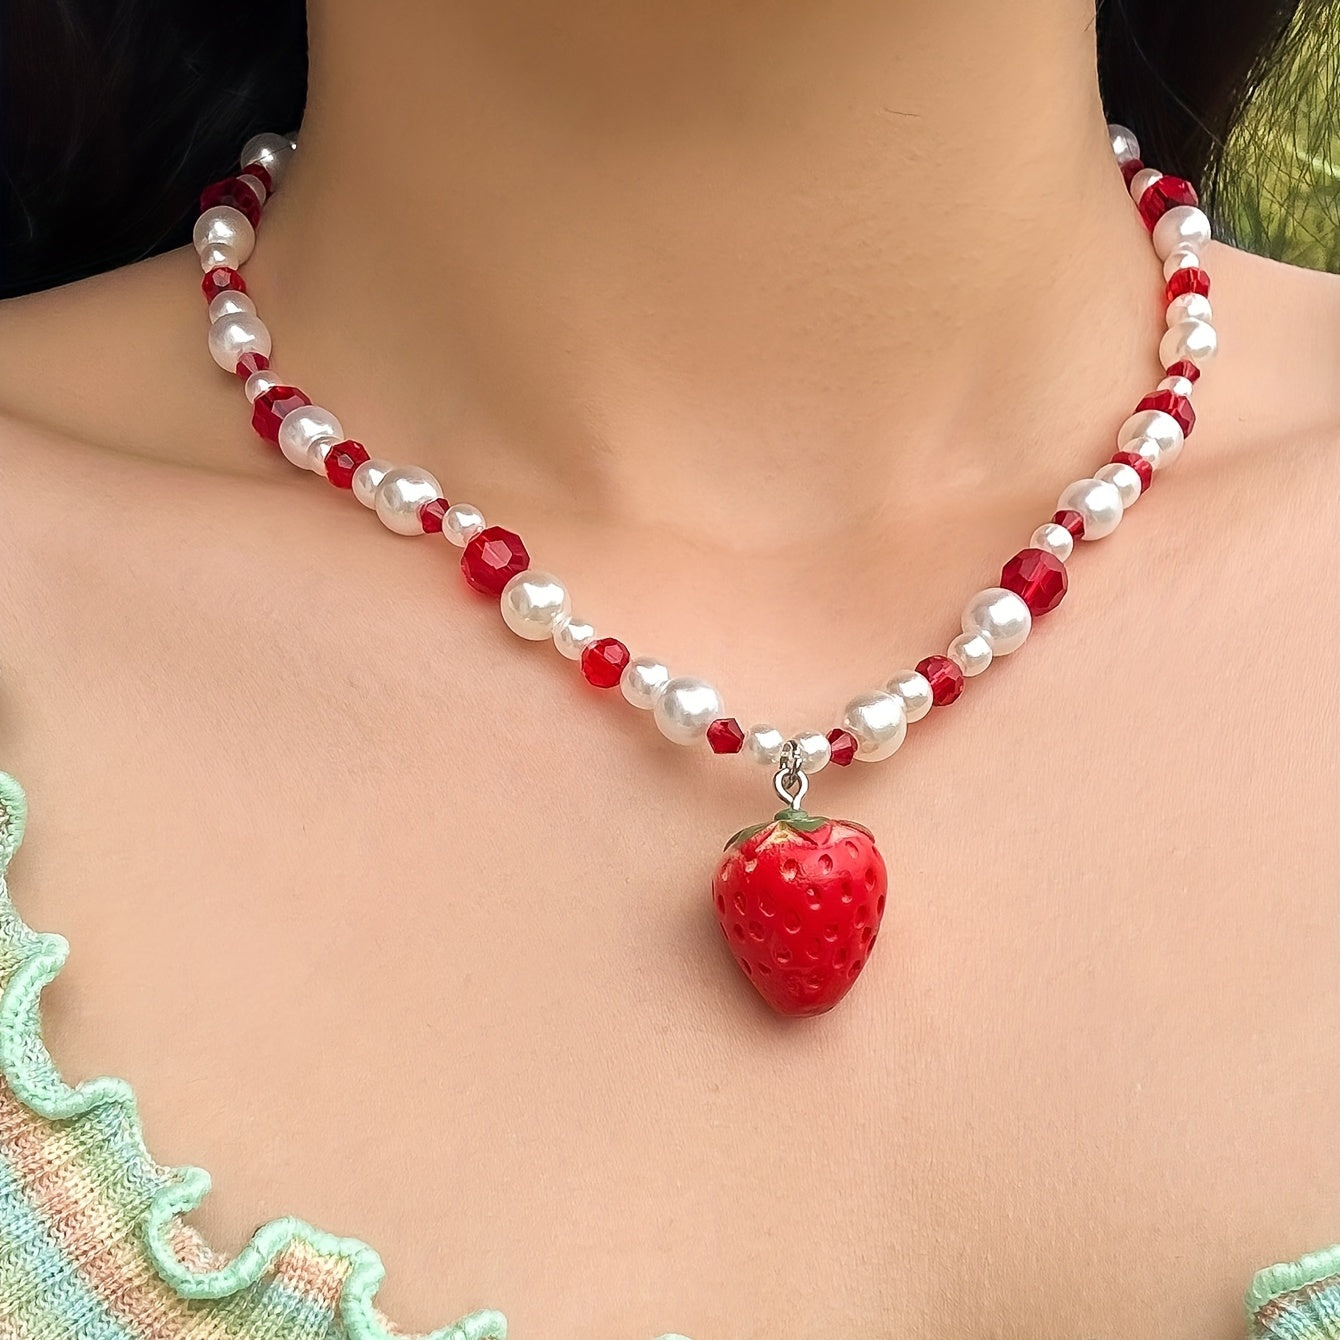 Sweet Strawberry Pendant Beaded Necklace - Perfect Gift for Girls for Summer Parties!